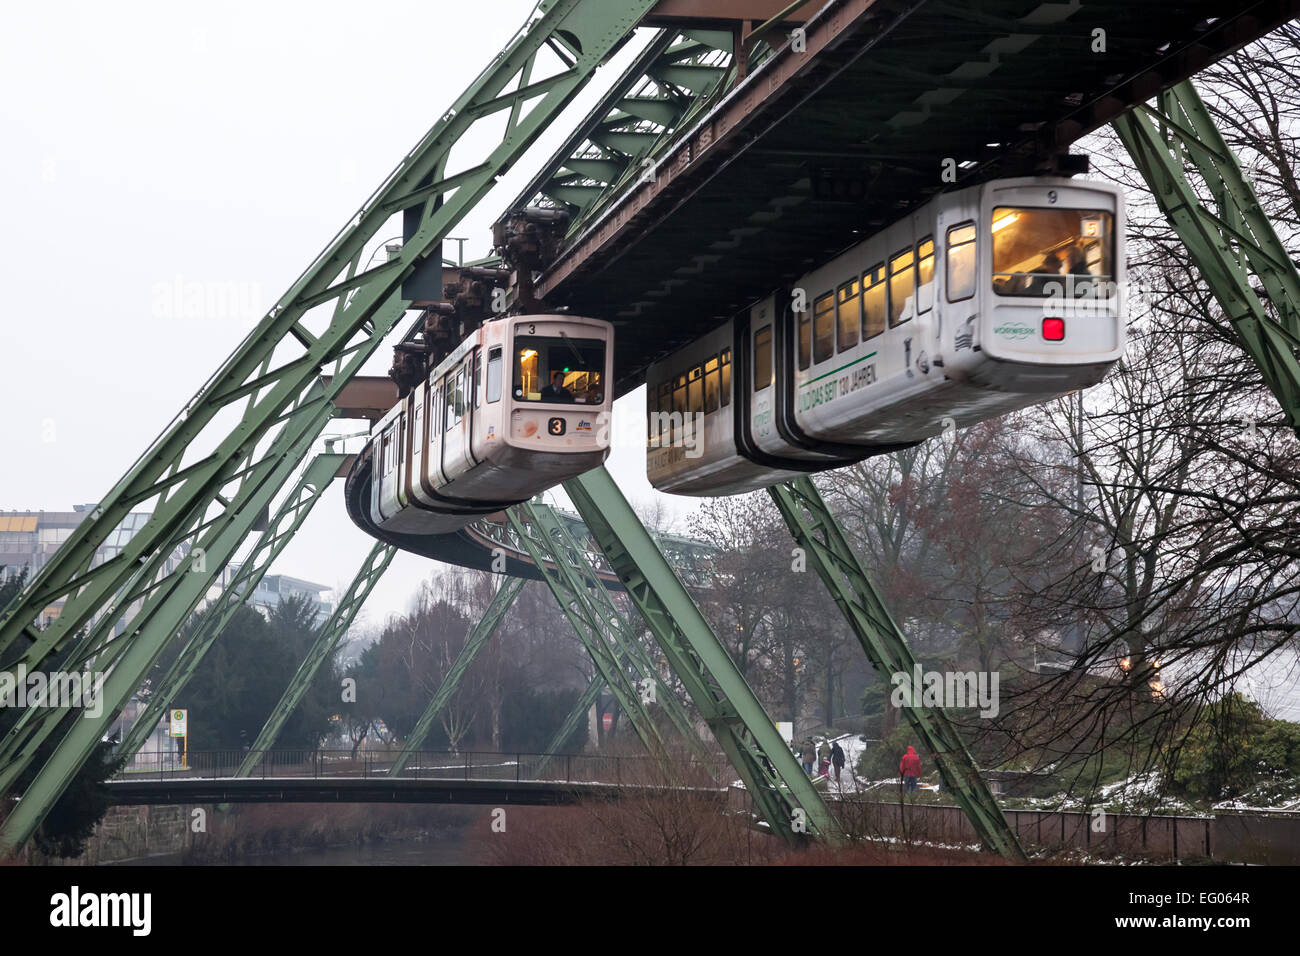 Wuppertal Suspension Railway (Wuppertaler Schwebebahn). The historic Railway was opened in 1901 and is still in use today Stock Photo